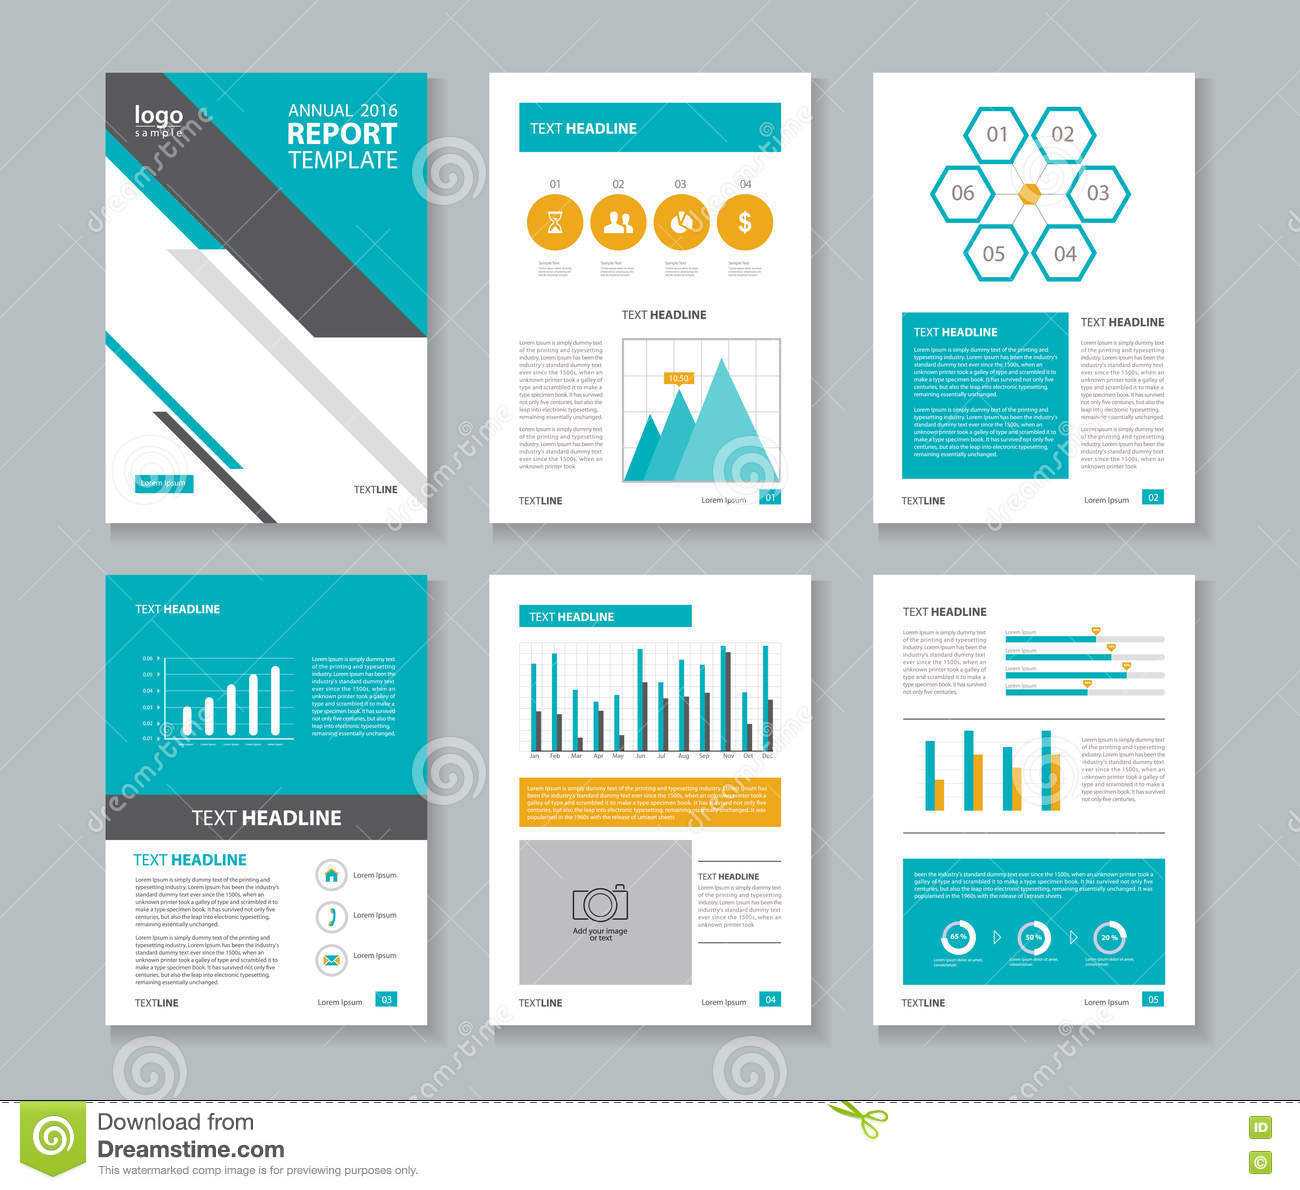 Marvelous Annual Report Template Word Ideas Free Download Intended For Annual Report Template Word Free Download